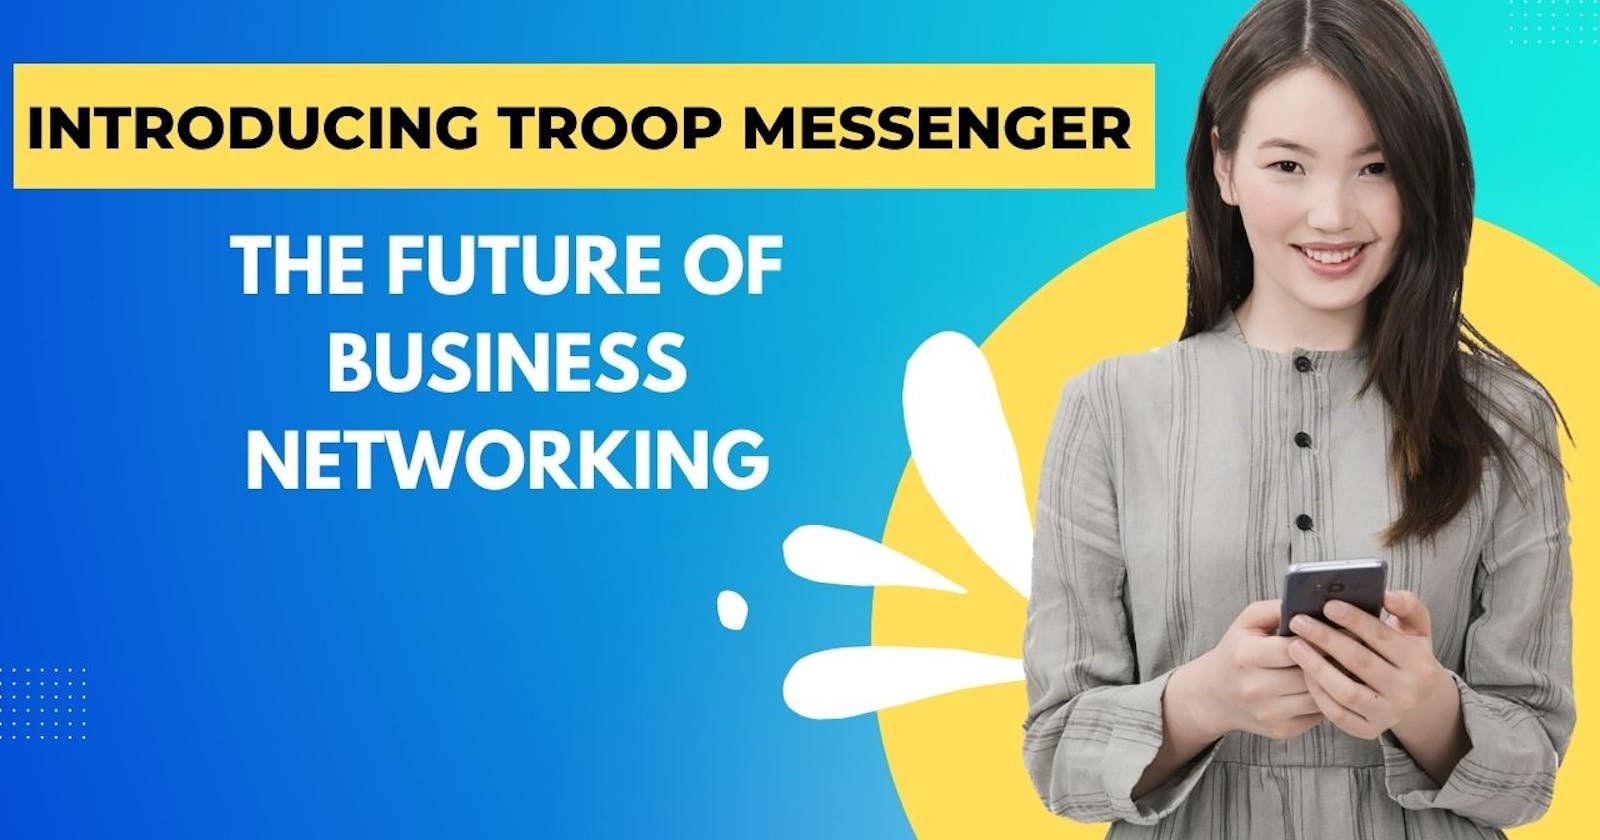 Introducing Troop Messenger: The Future of Business Networking